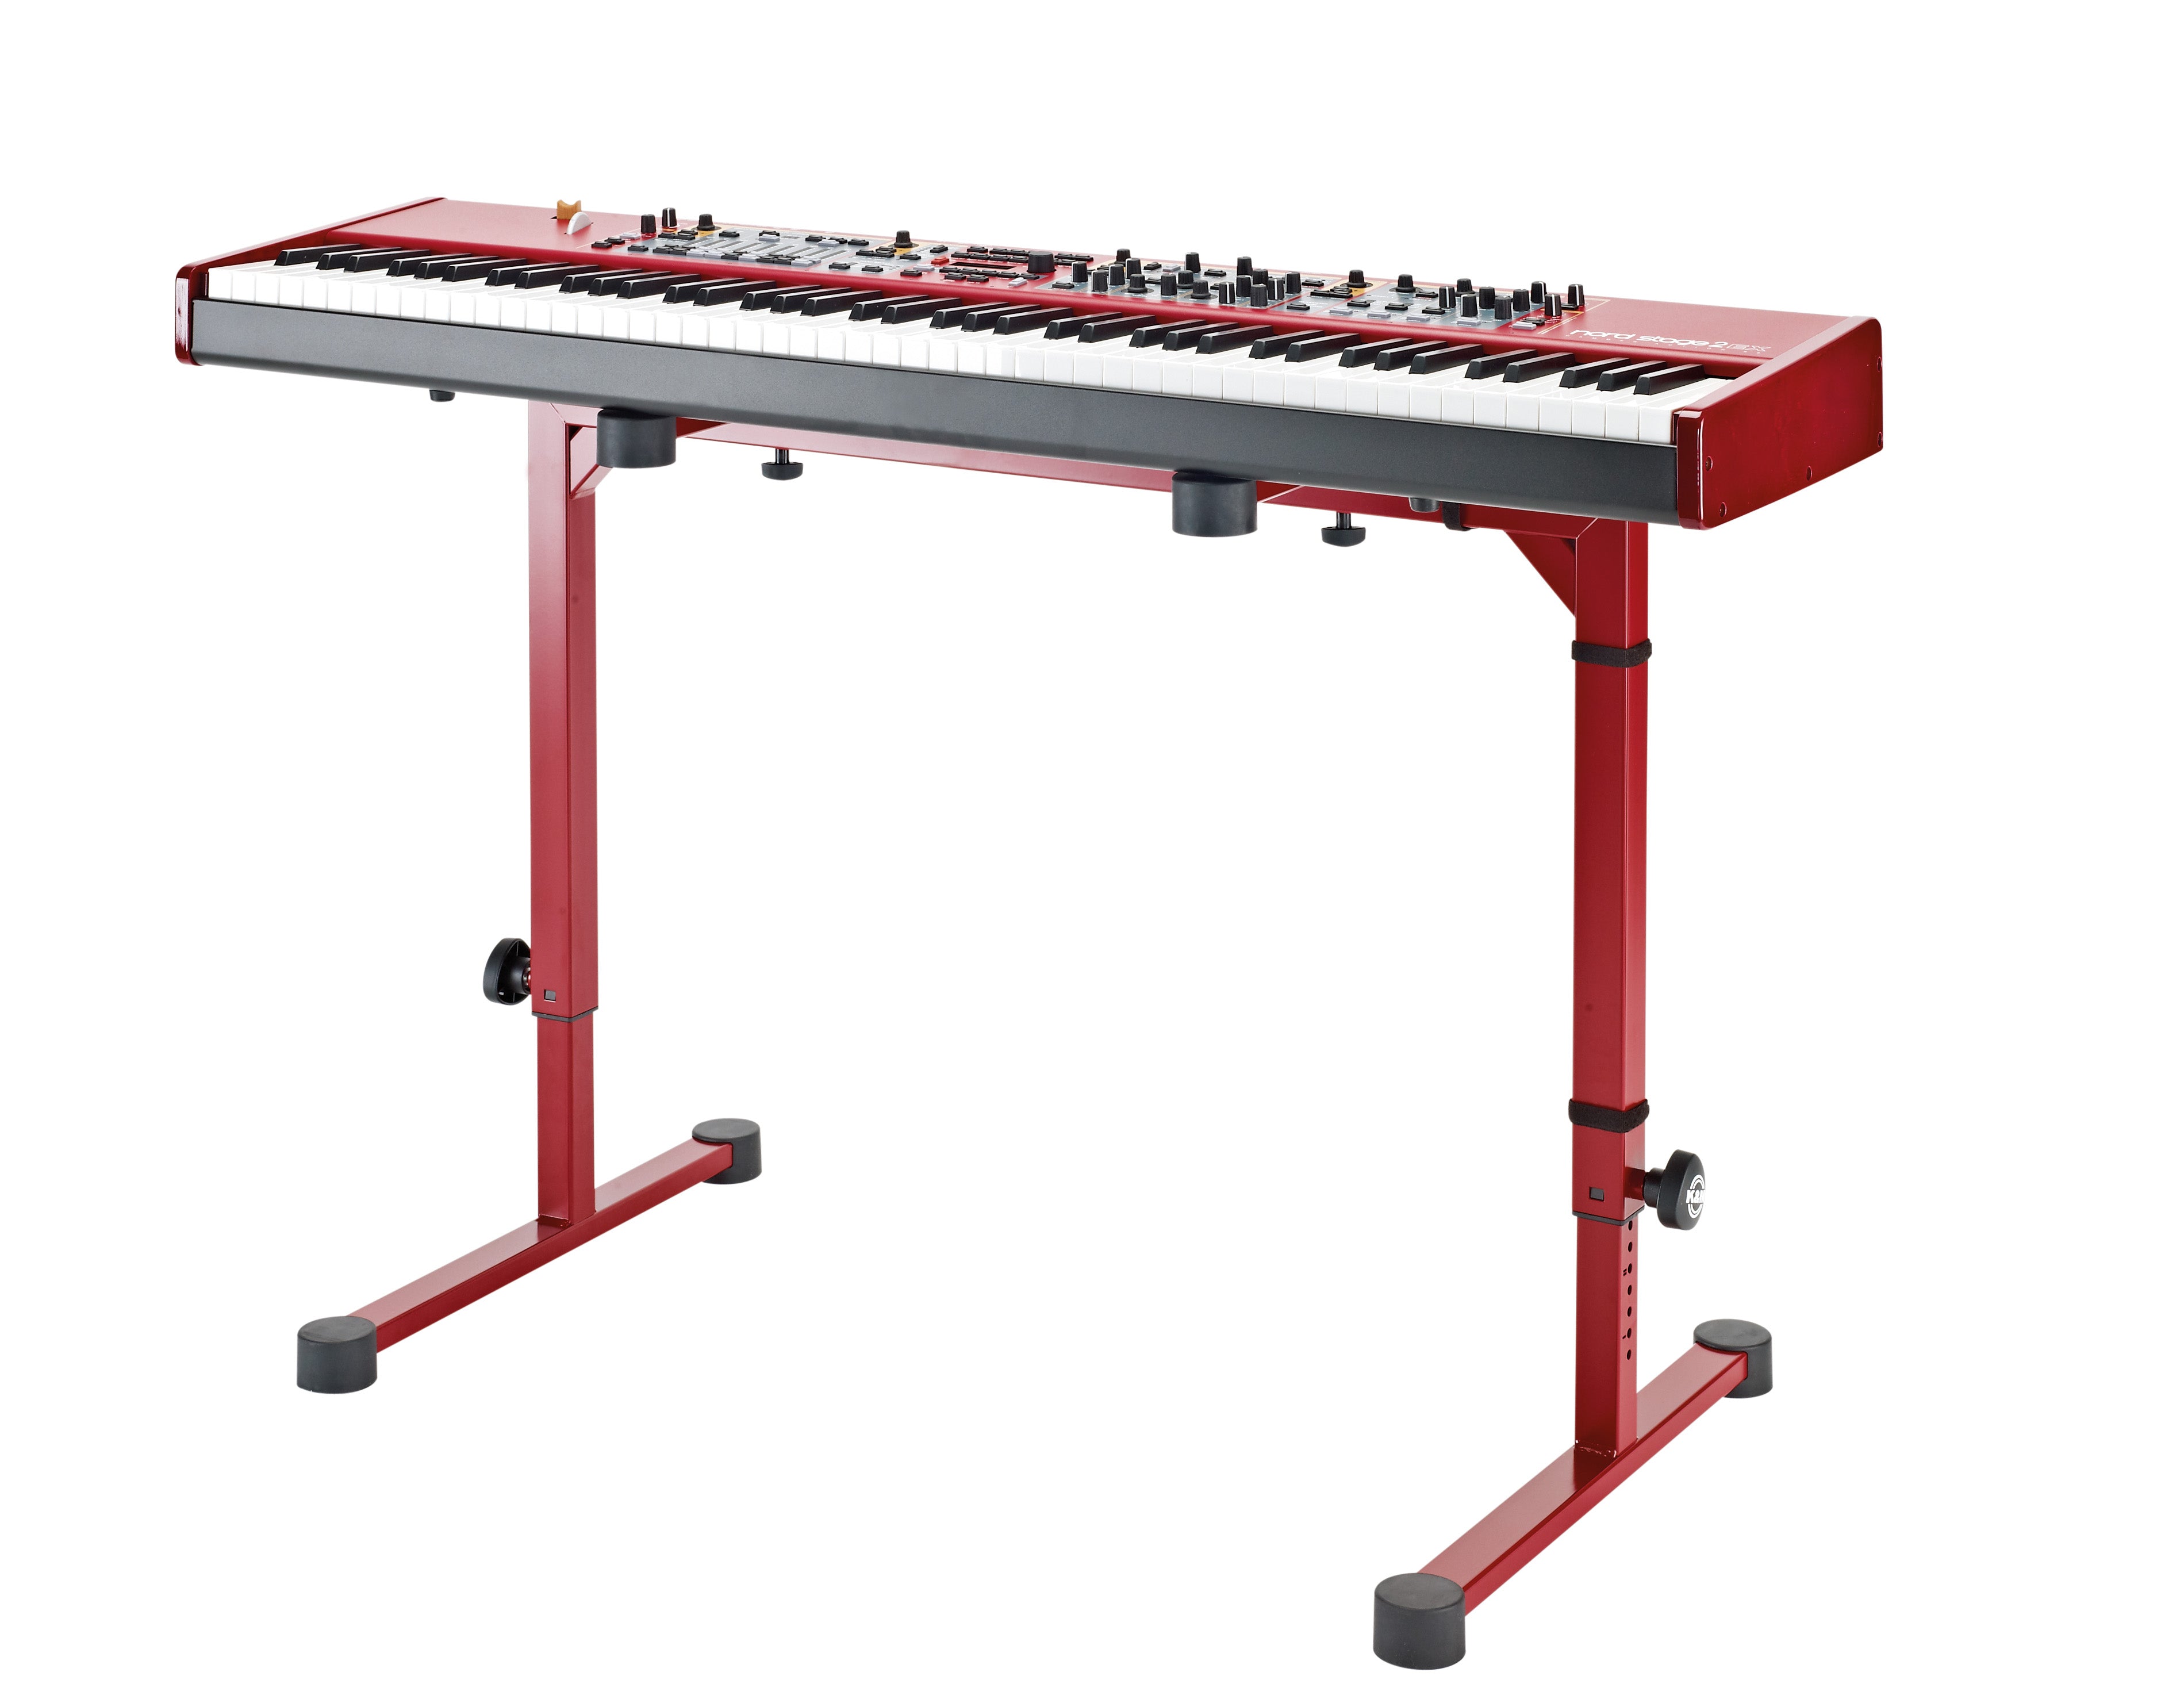 Ruby　stand　KM　Tom　keyboard　—　18810　Table-style　Lee　»Omega«,　Red　Music